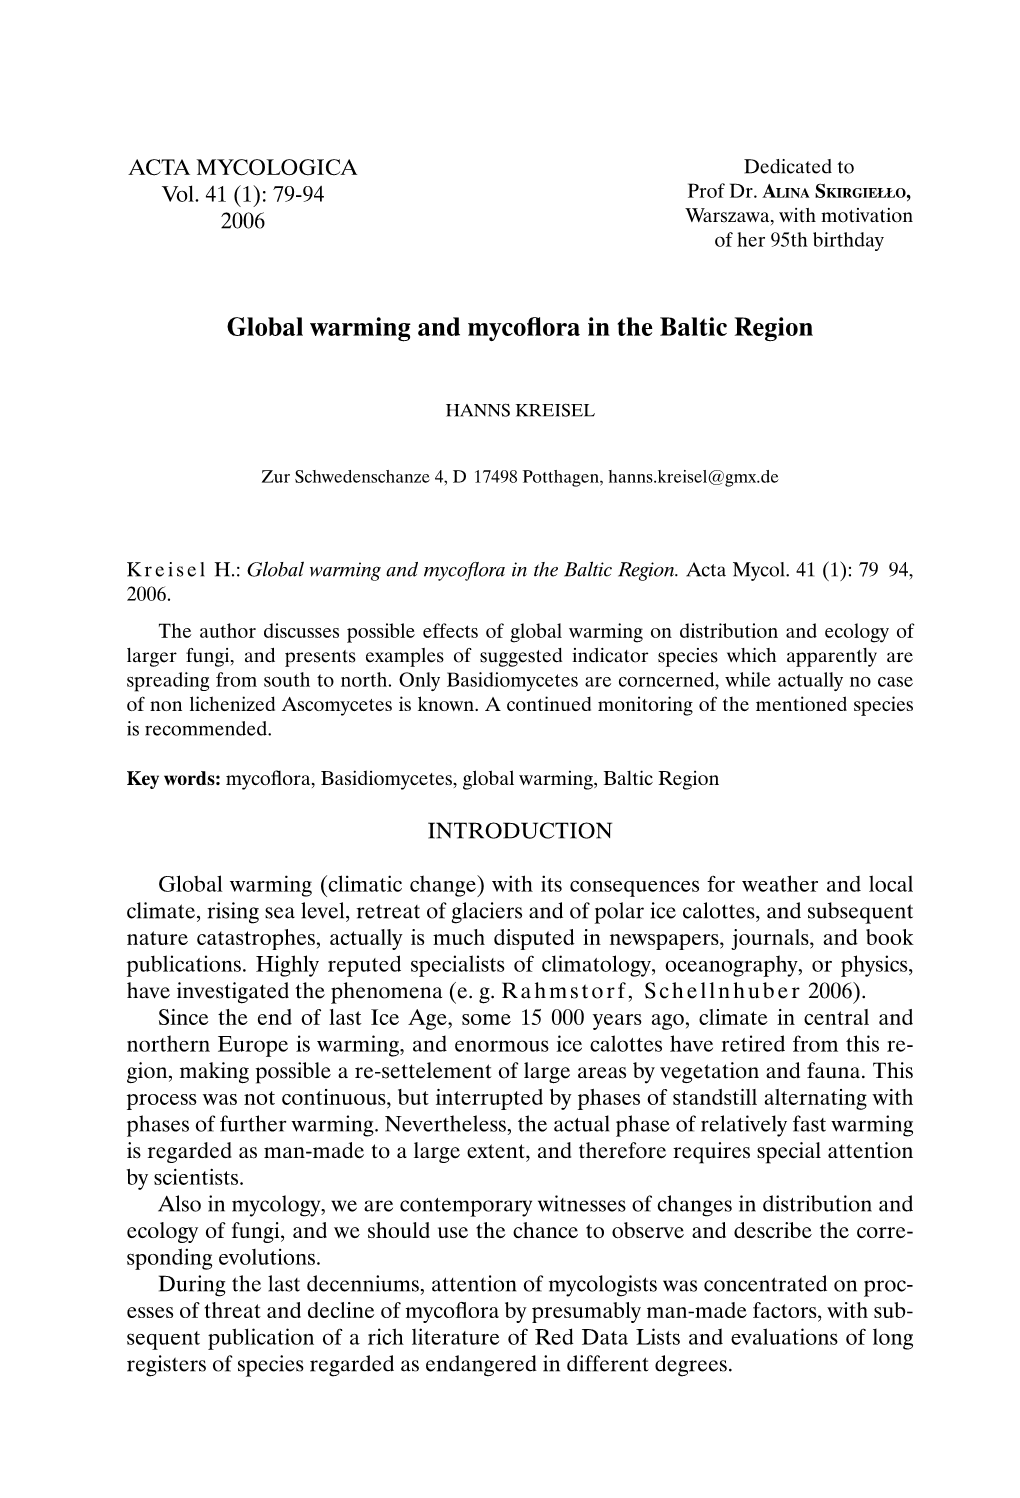 Global Warming and Mycoflora in the Baltic Region